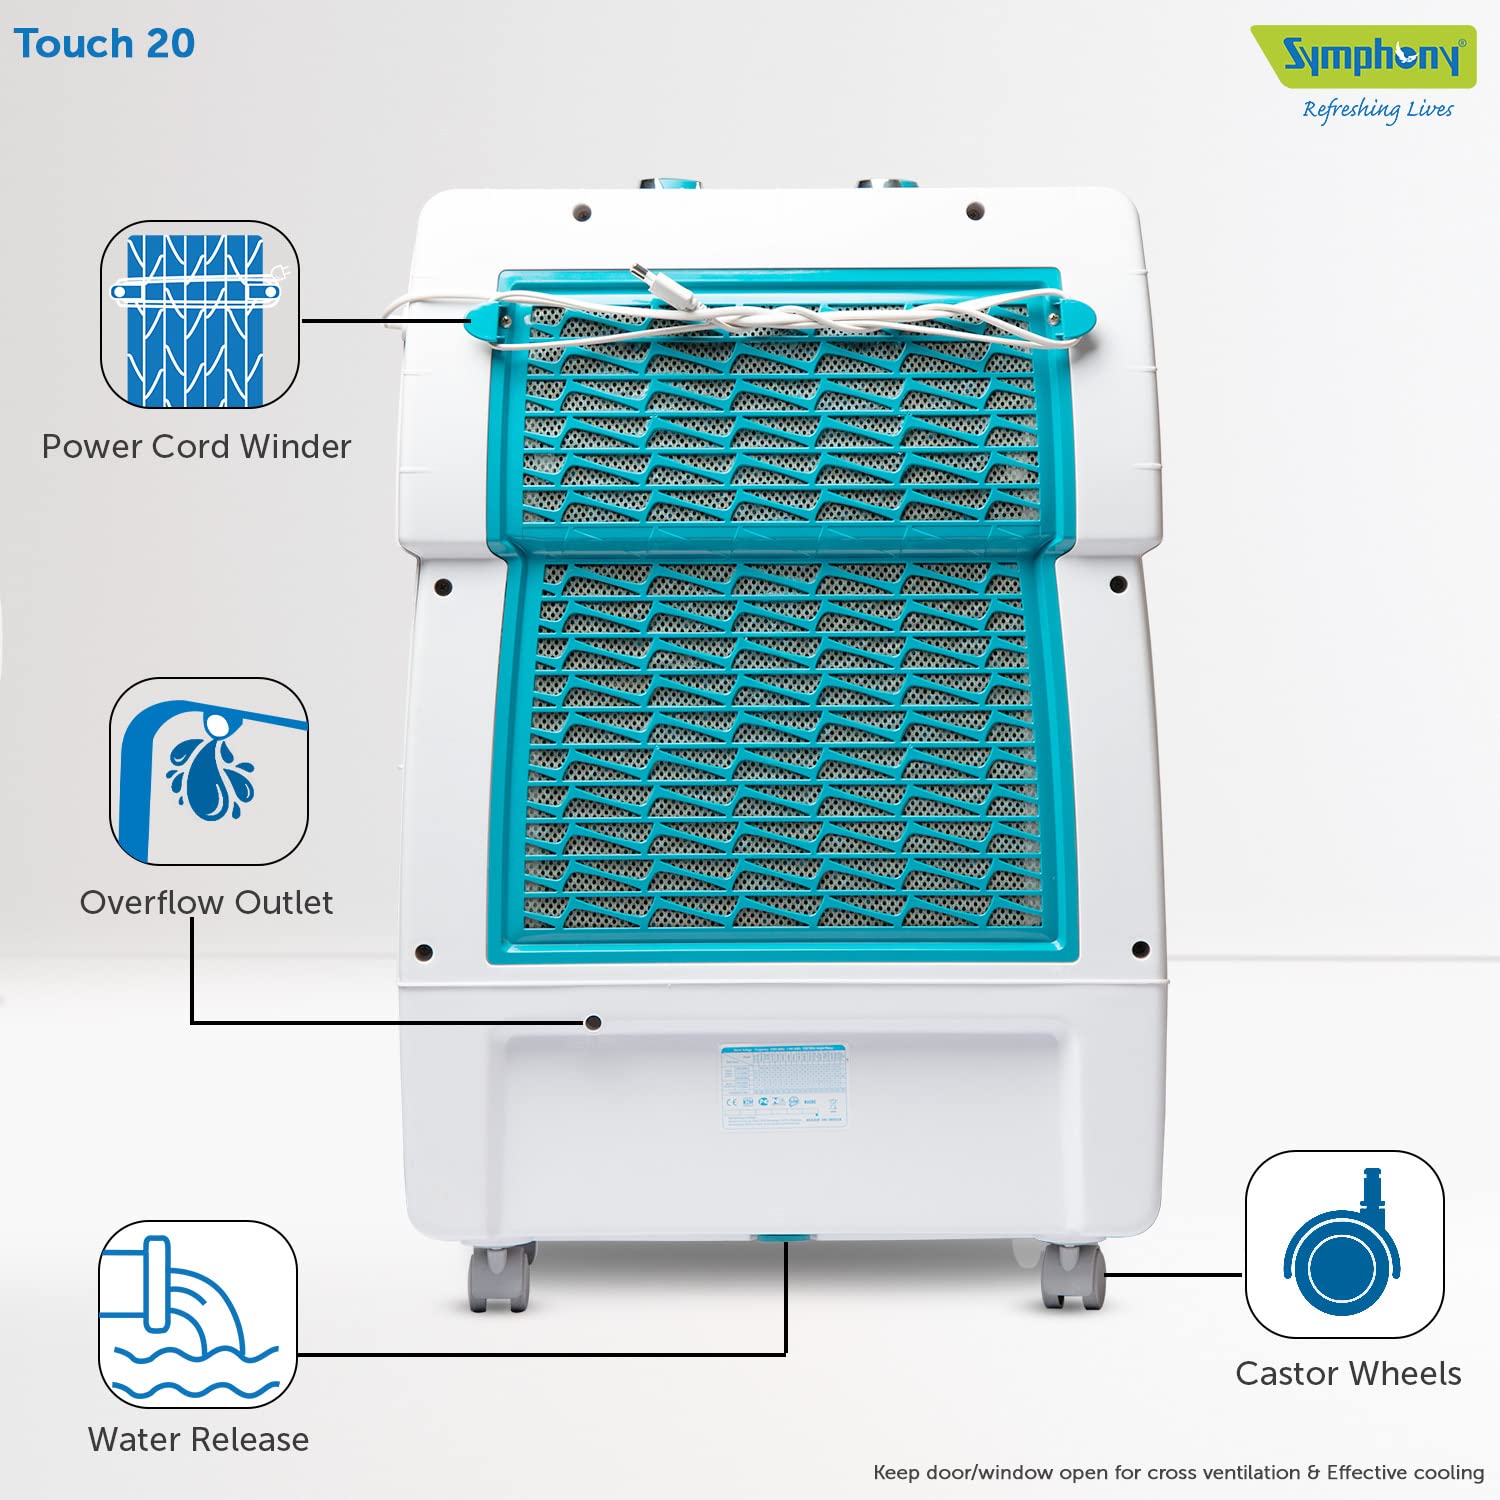 Symphony Touch 20 Personal Air Cooler for Home with Honeycomb Pads, Powerful Blower, i-Pure Technology and Removable Tank